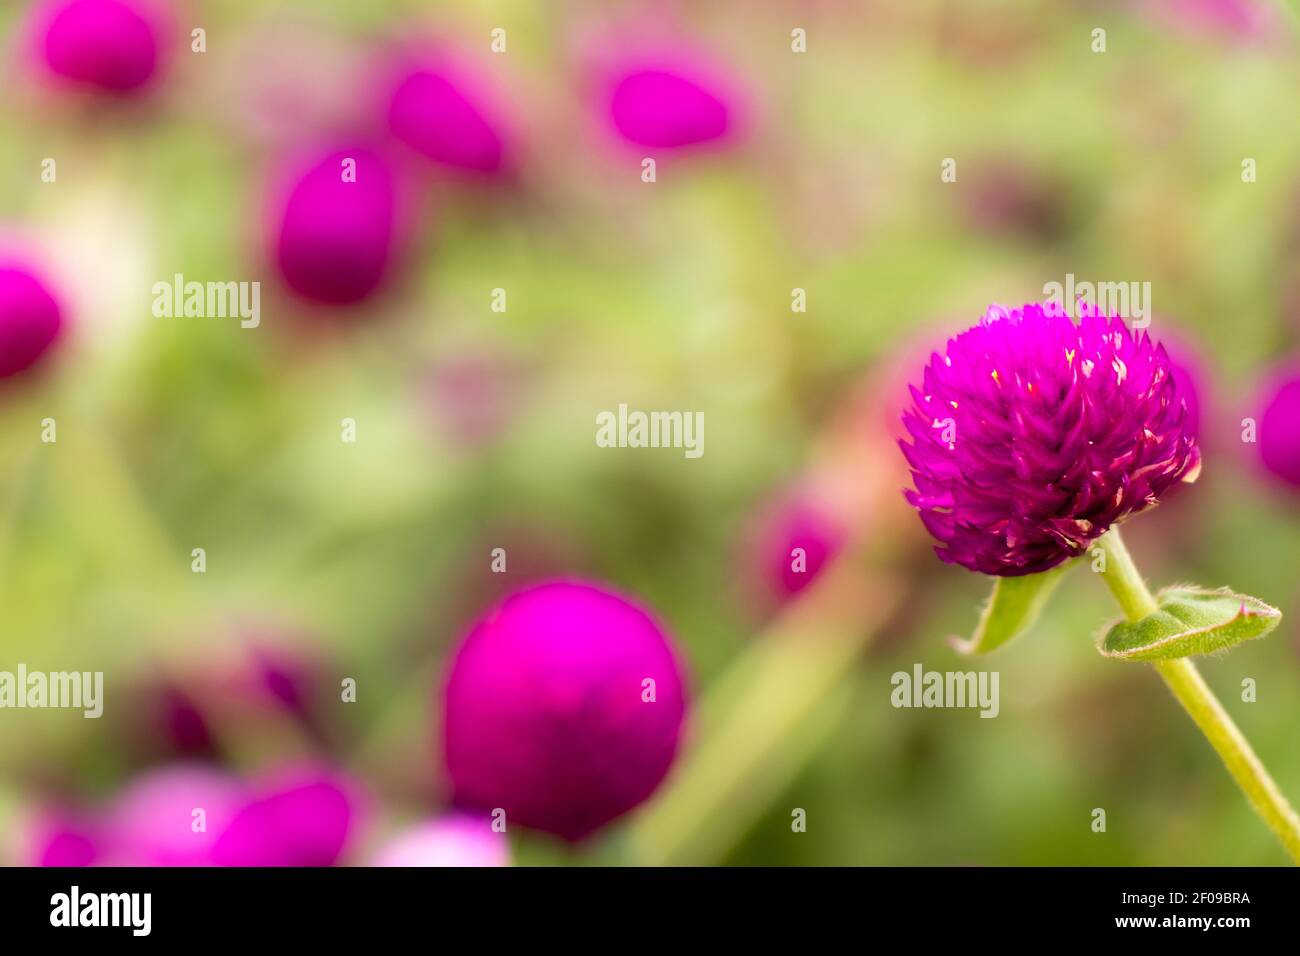 Violet color globe amaranth with blurred background Stock Photo